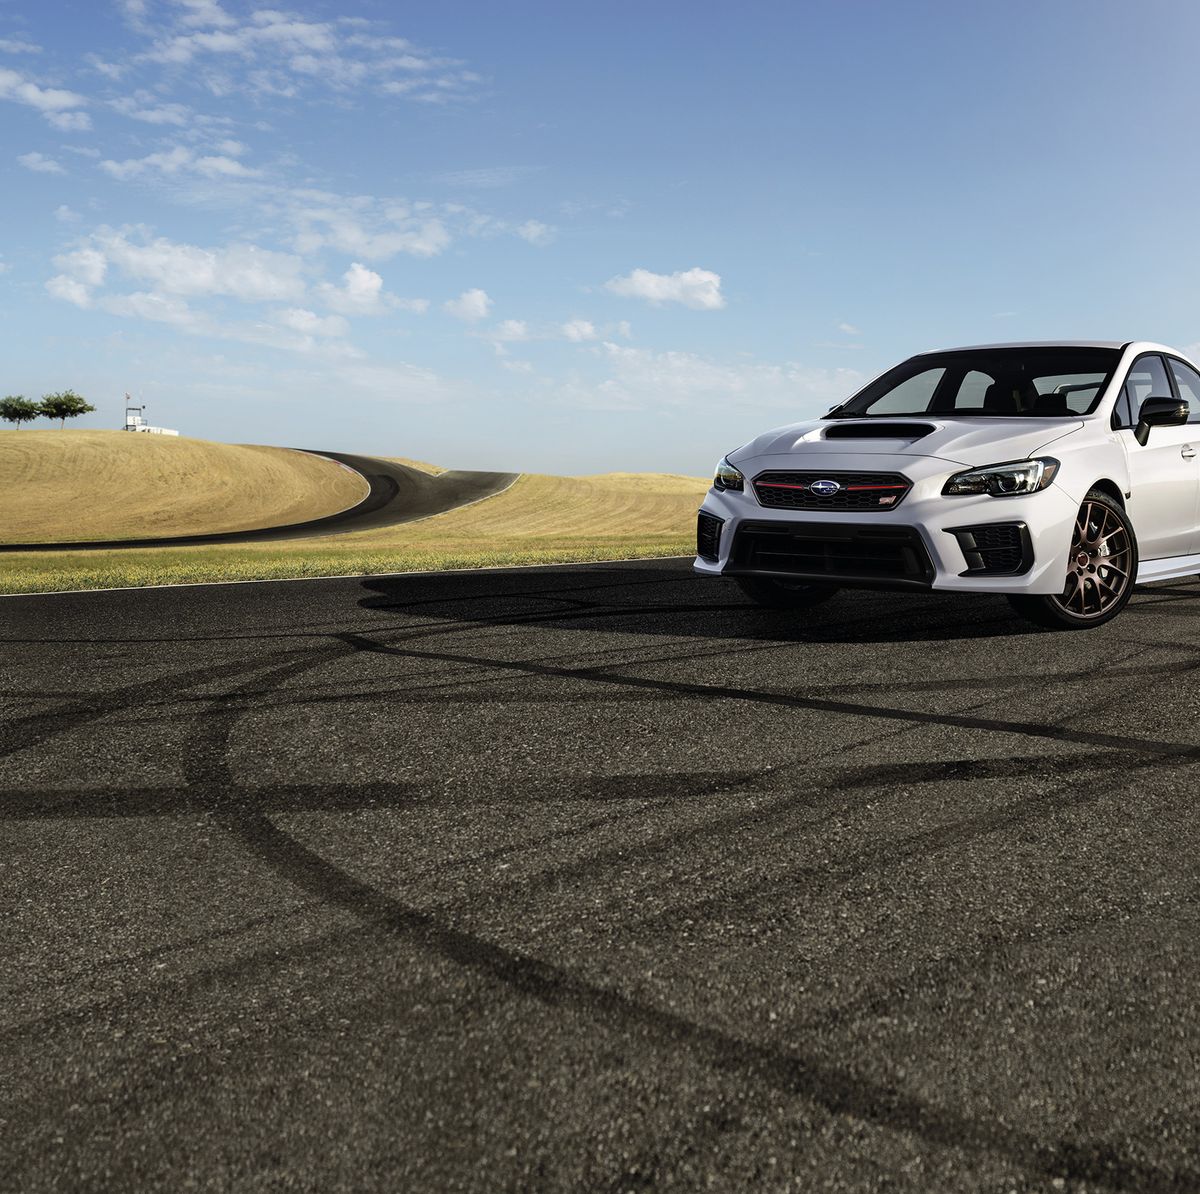 Subaru WRX and STI Buyer's Guide: Every Think You Need to Know